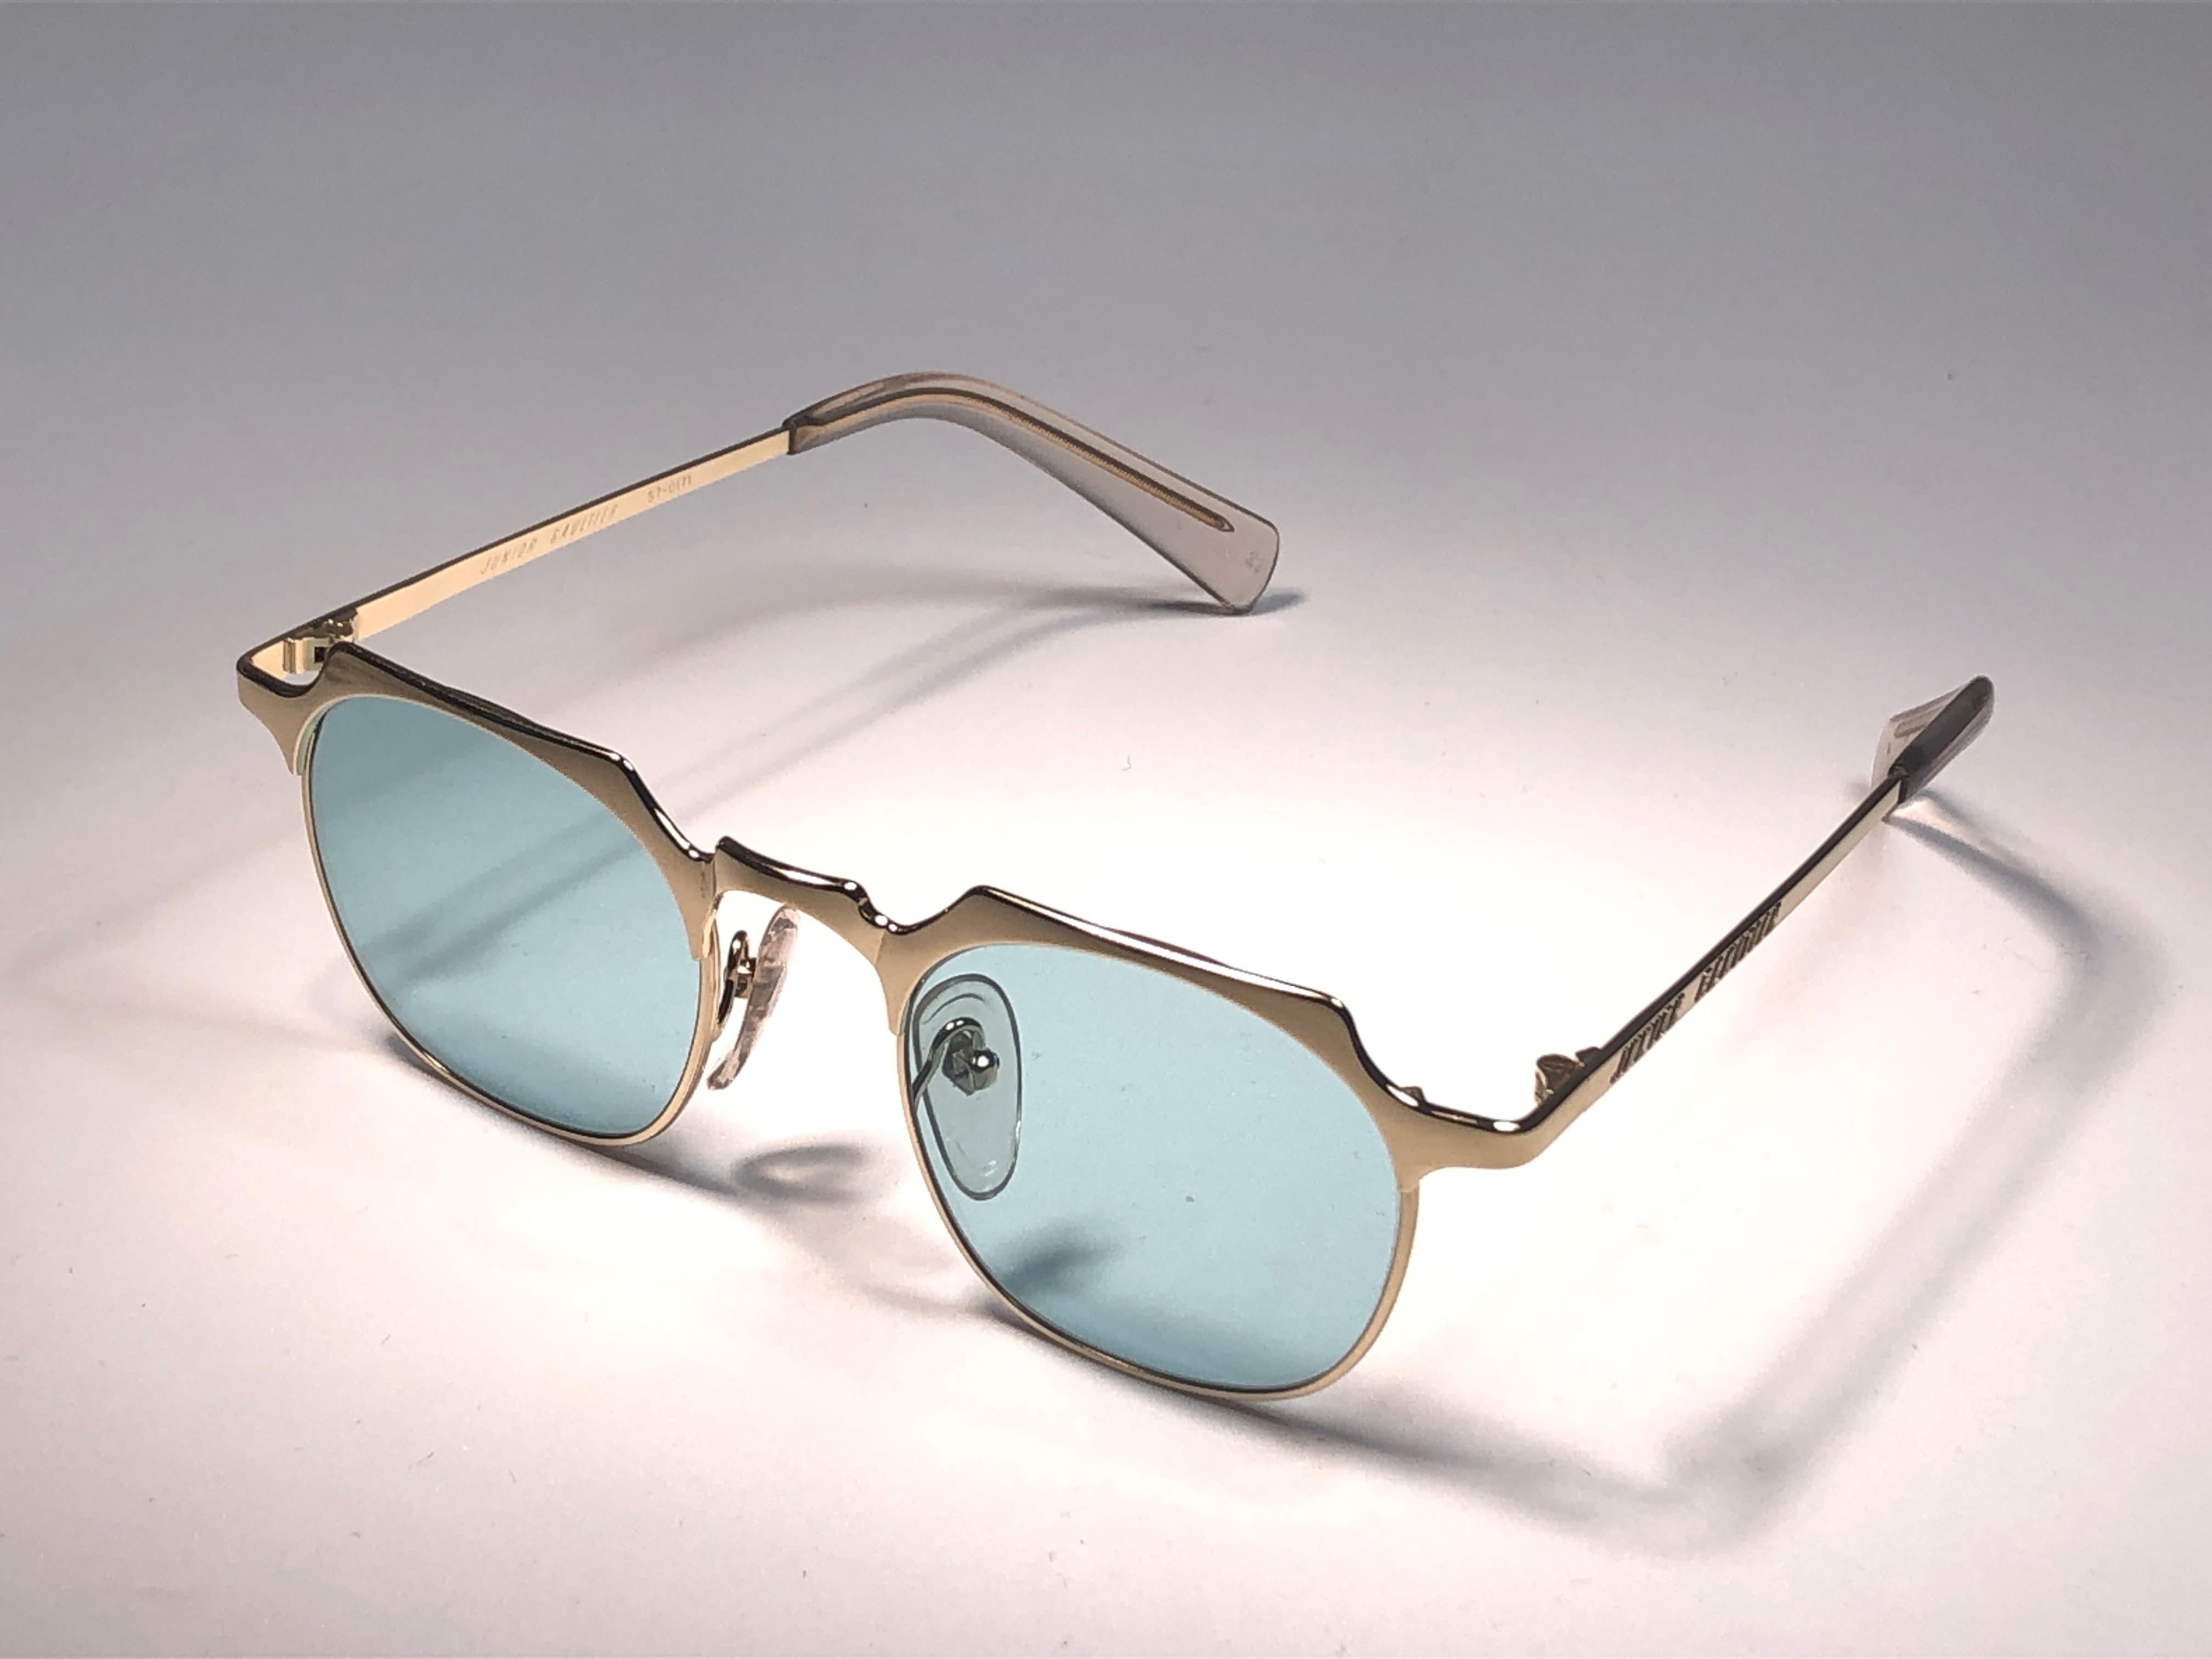 New Jean Paul Gaultier 57 0171 Oval Gold Sunglasses 1990's Made in Japan  3